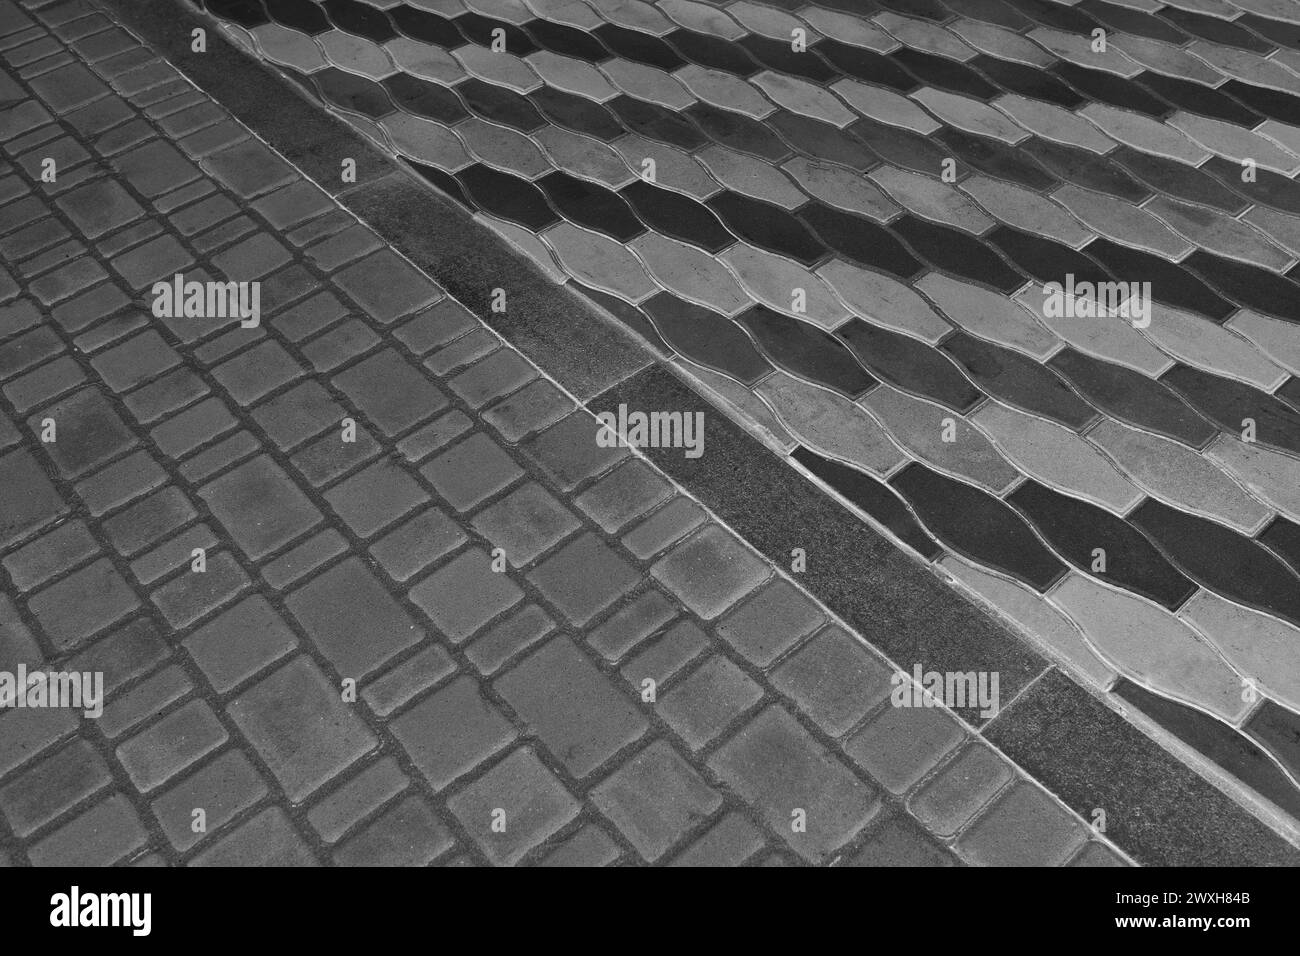 Two Kinds Paving Black Tiles Dividing Border Curb Mosaic Stone Street Road City Texture Background Dark Line. Stock Photo